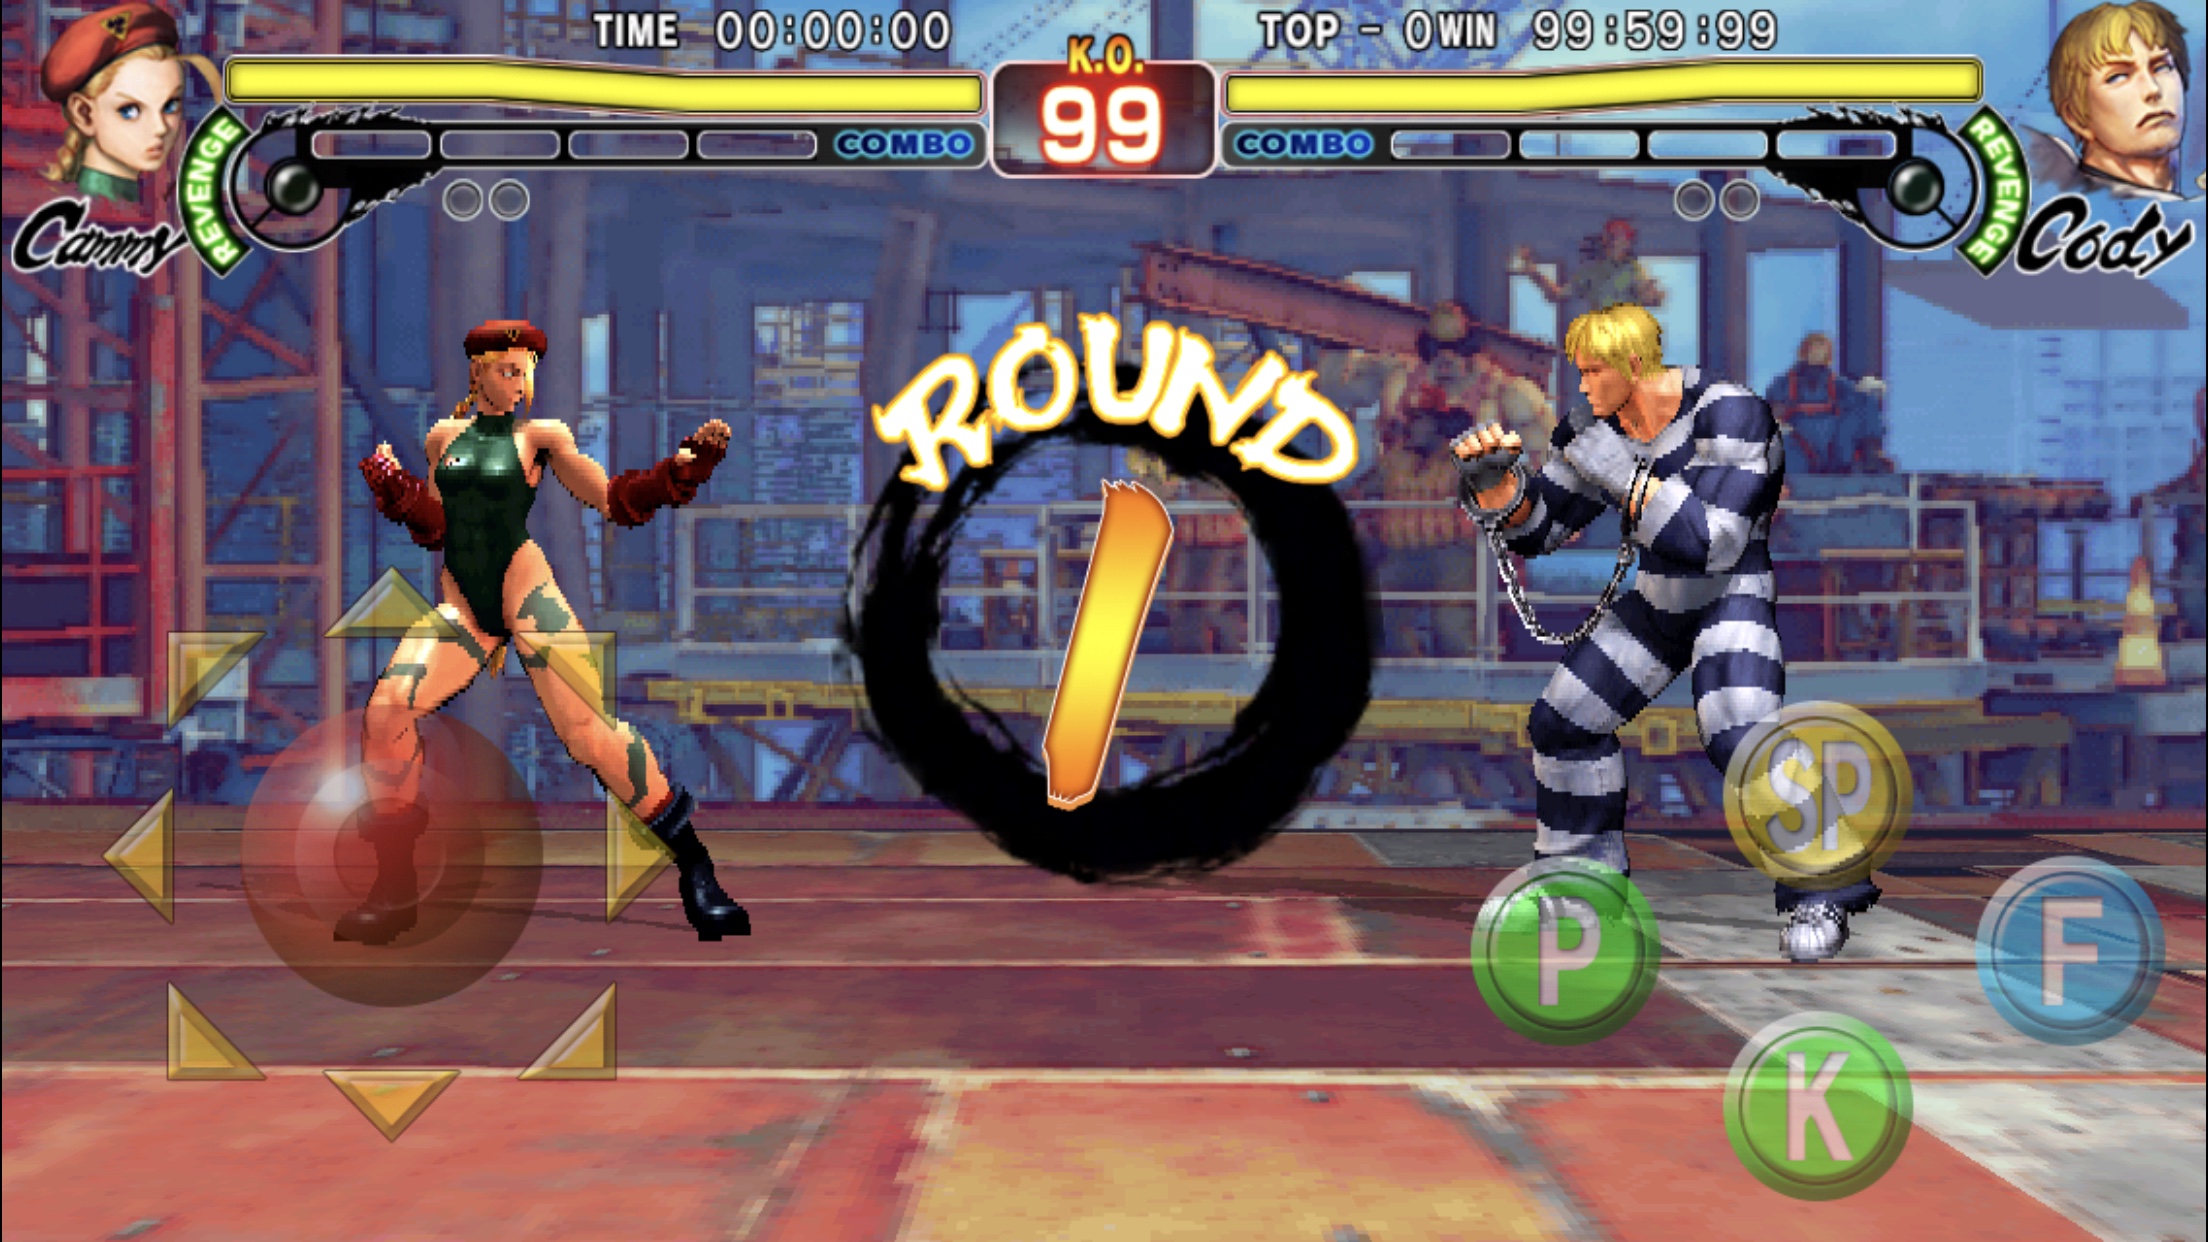 K.O. on-the-go with Street Fighter IV Champion Edition